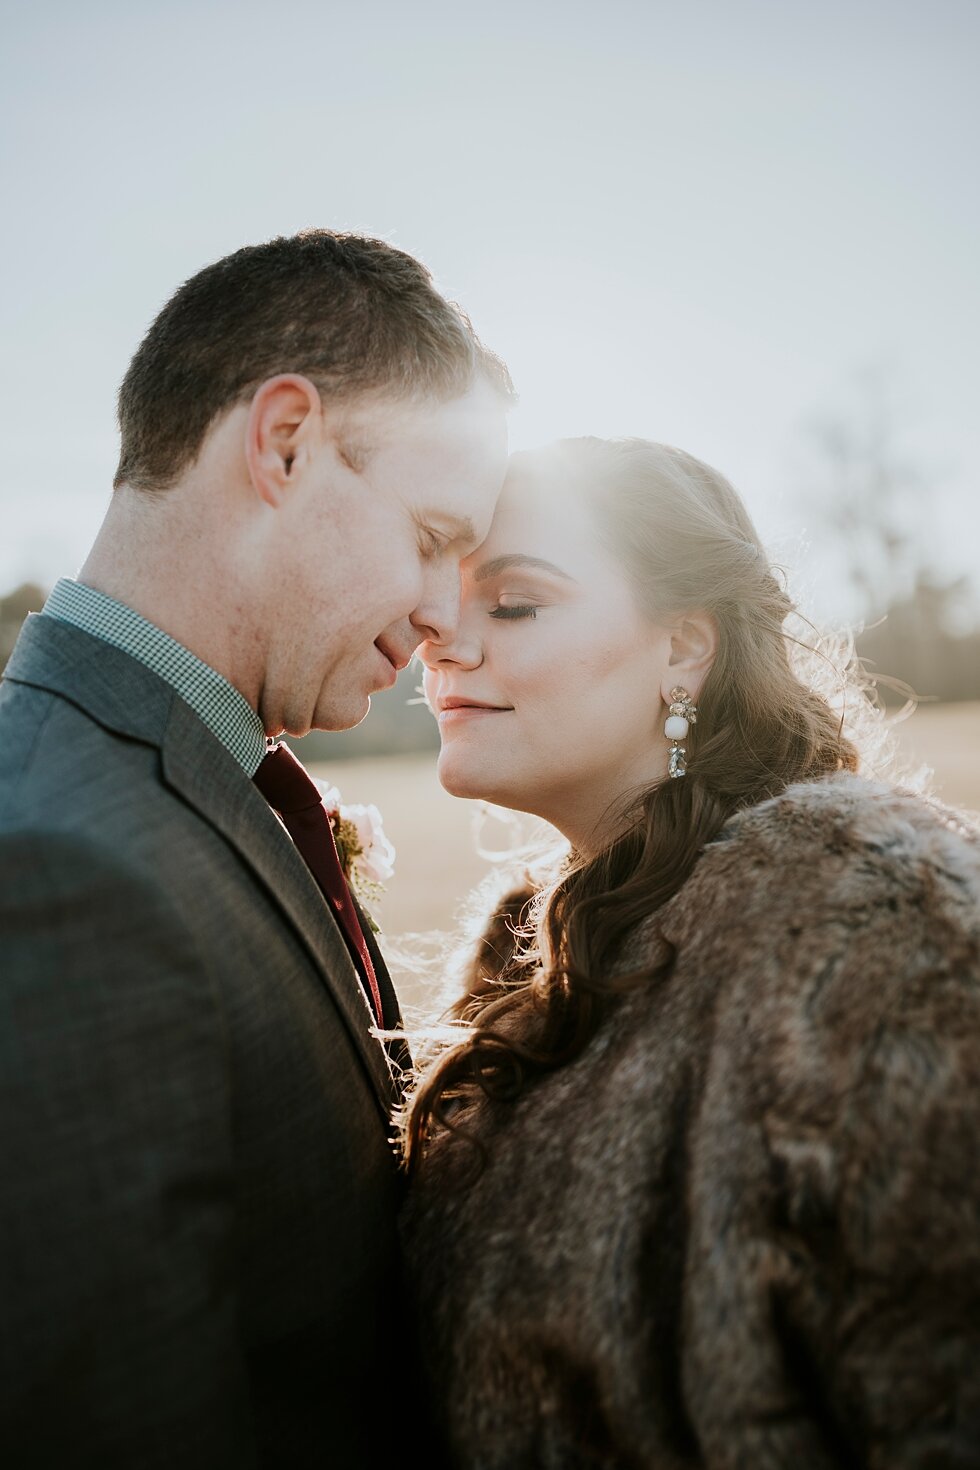  The golden hour of photography that allows this bride and groom to literally glow in Corydon, Indiana after their intimate backyard wedding. Southern wedding Indiana intimate wedding small ceremony microceremony corydon indiana professional photogra